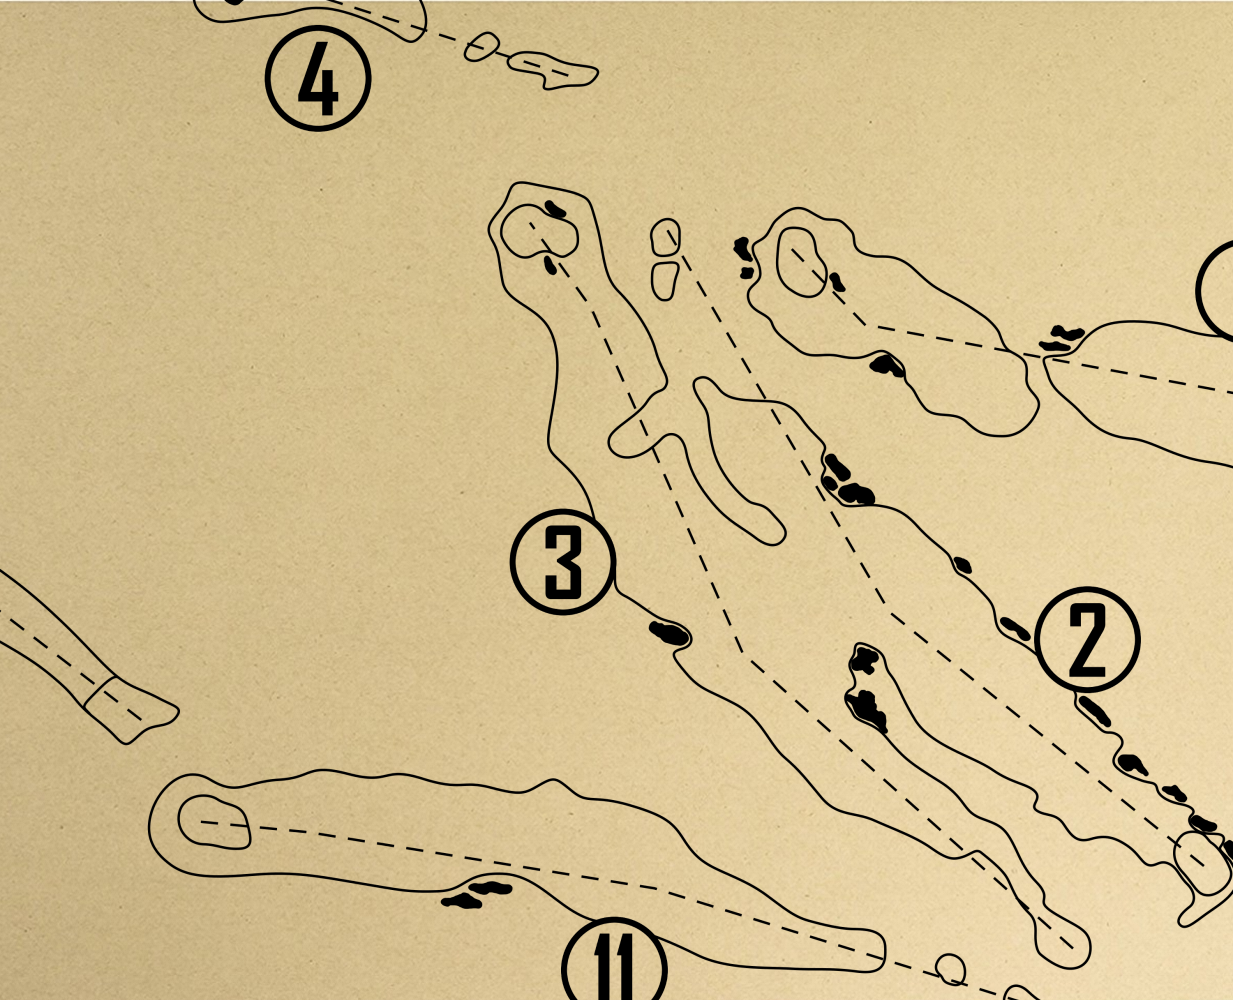 Point Hardy Golf Club at Cabot Saint Lucia Outline (Print)